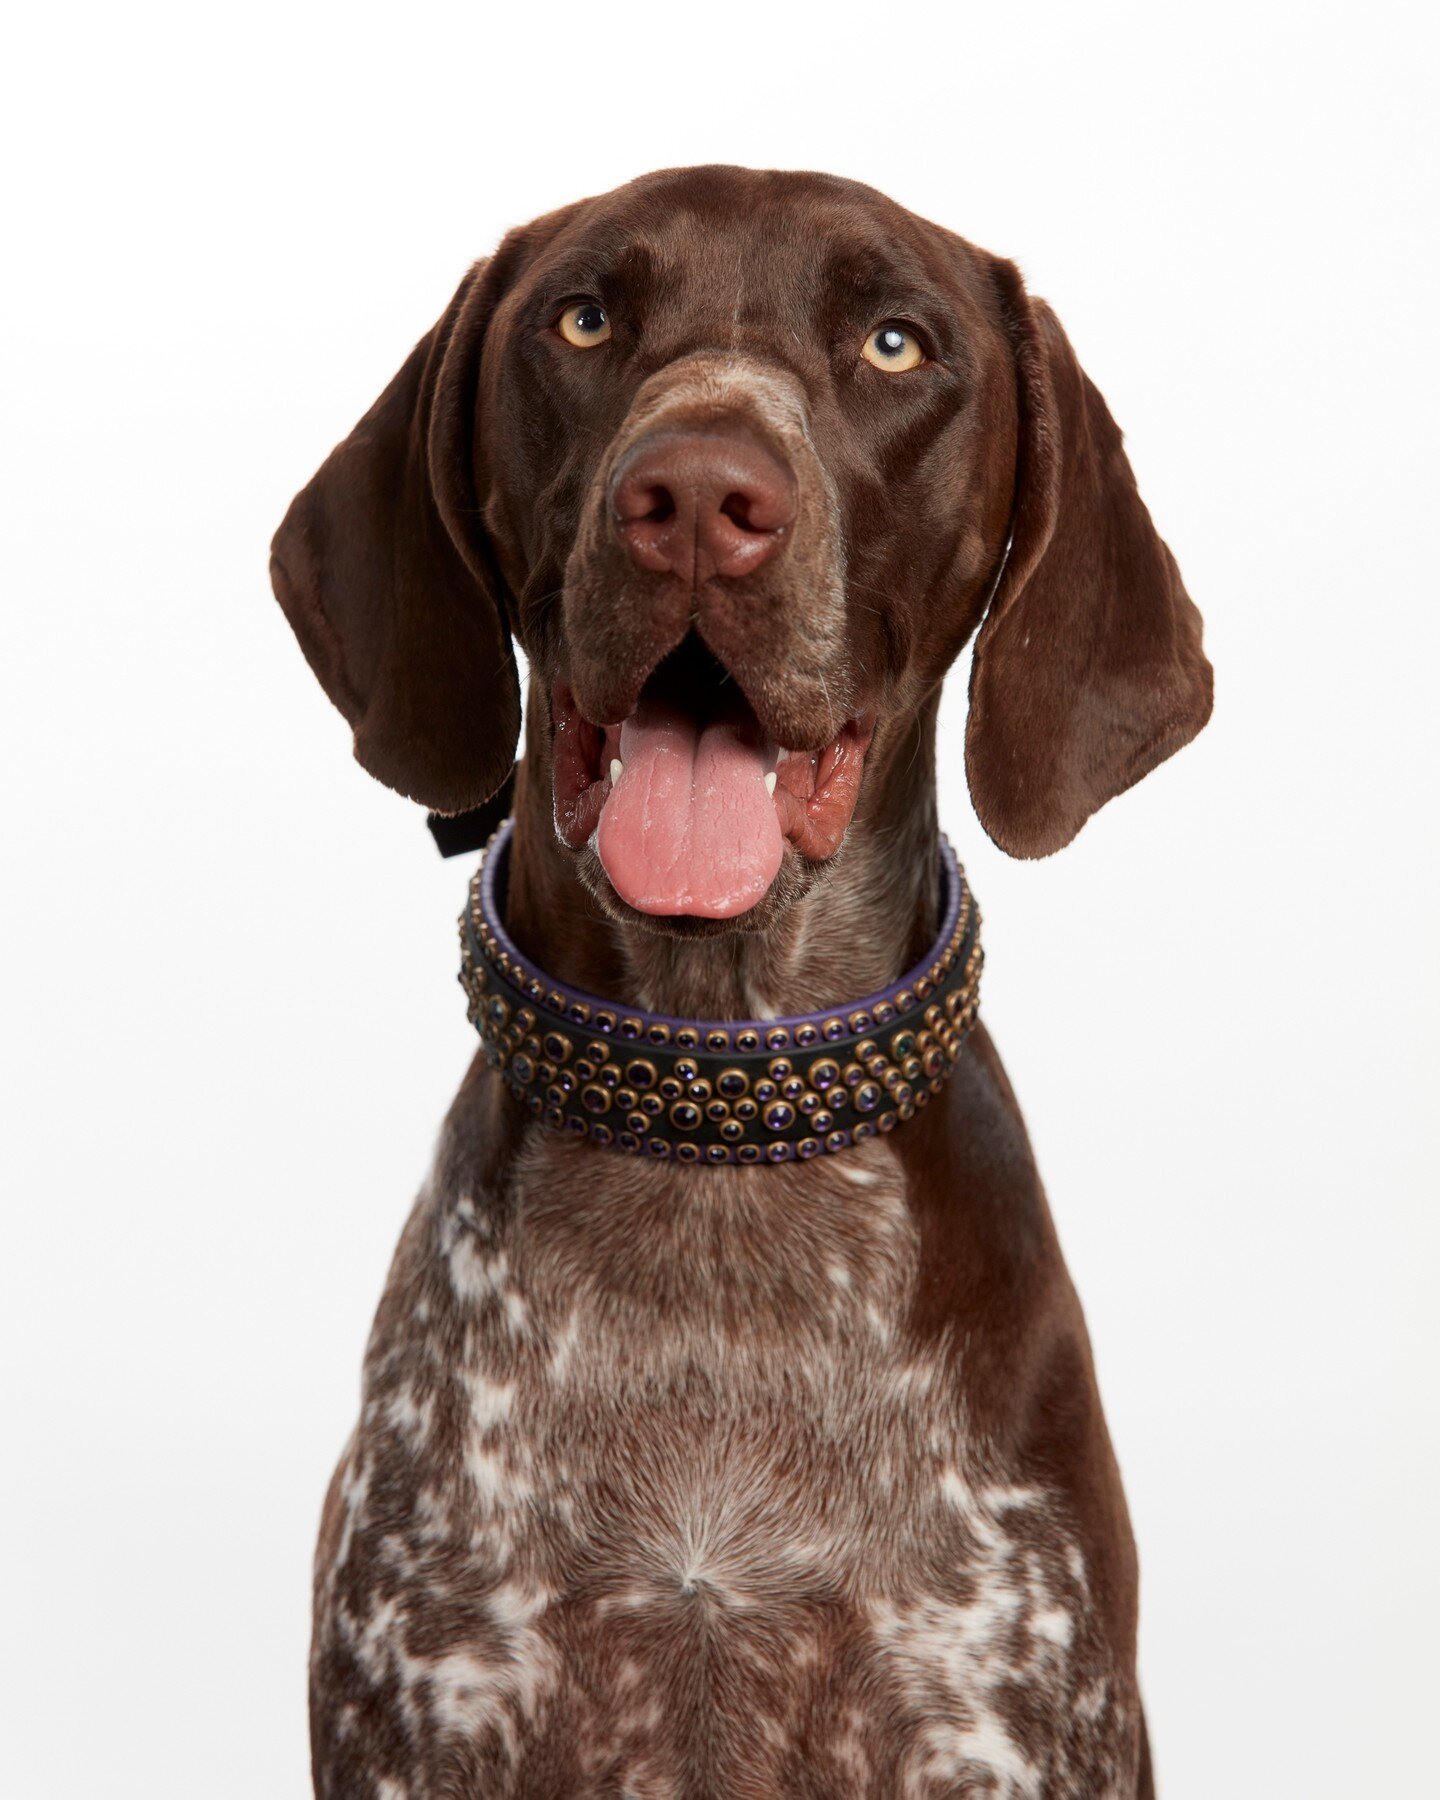 Peach the German Shorthaired Pointer 

German Shorthaired Pointers were originally bred in Germany in the late 19th century for hunting game birds, such as pheasants and quail.
They are versatile hunting dogs that are also skilled at tracking, retrie